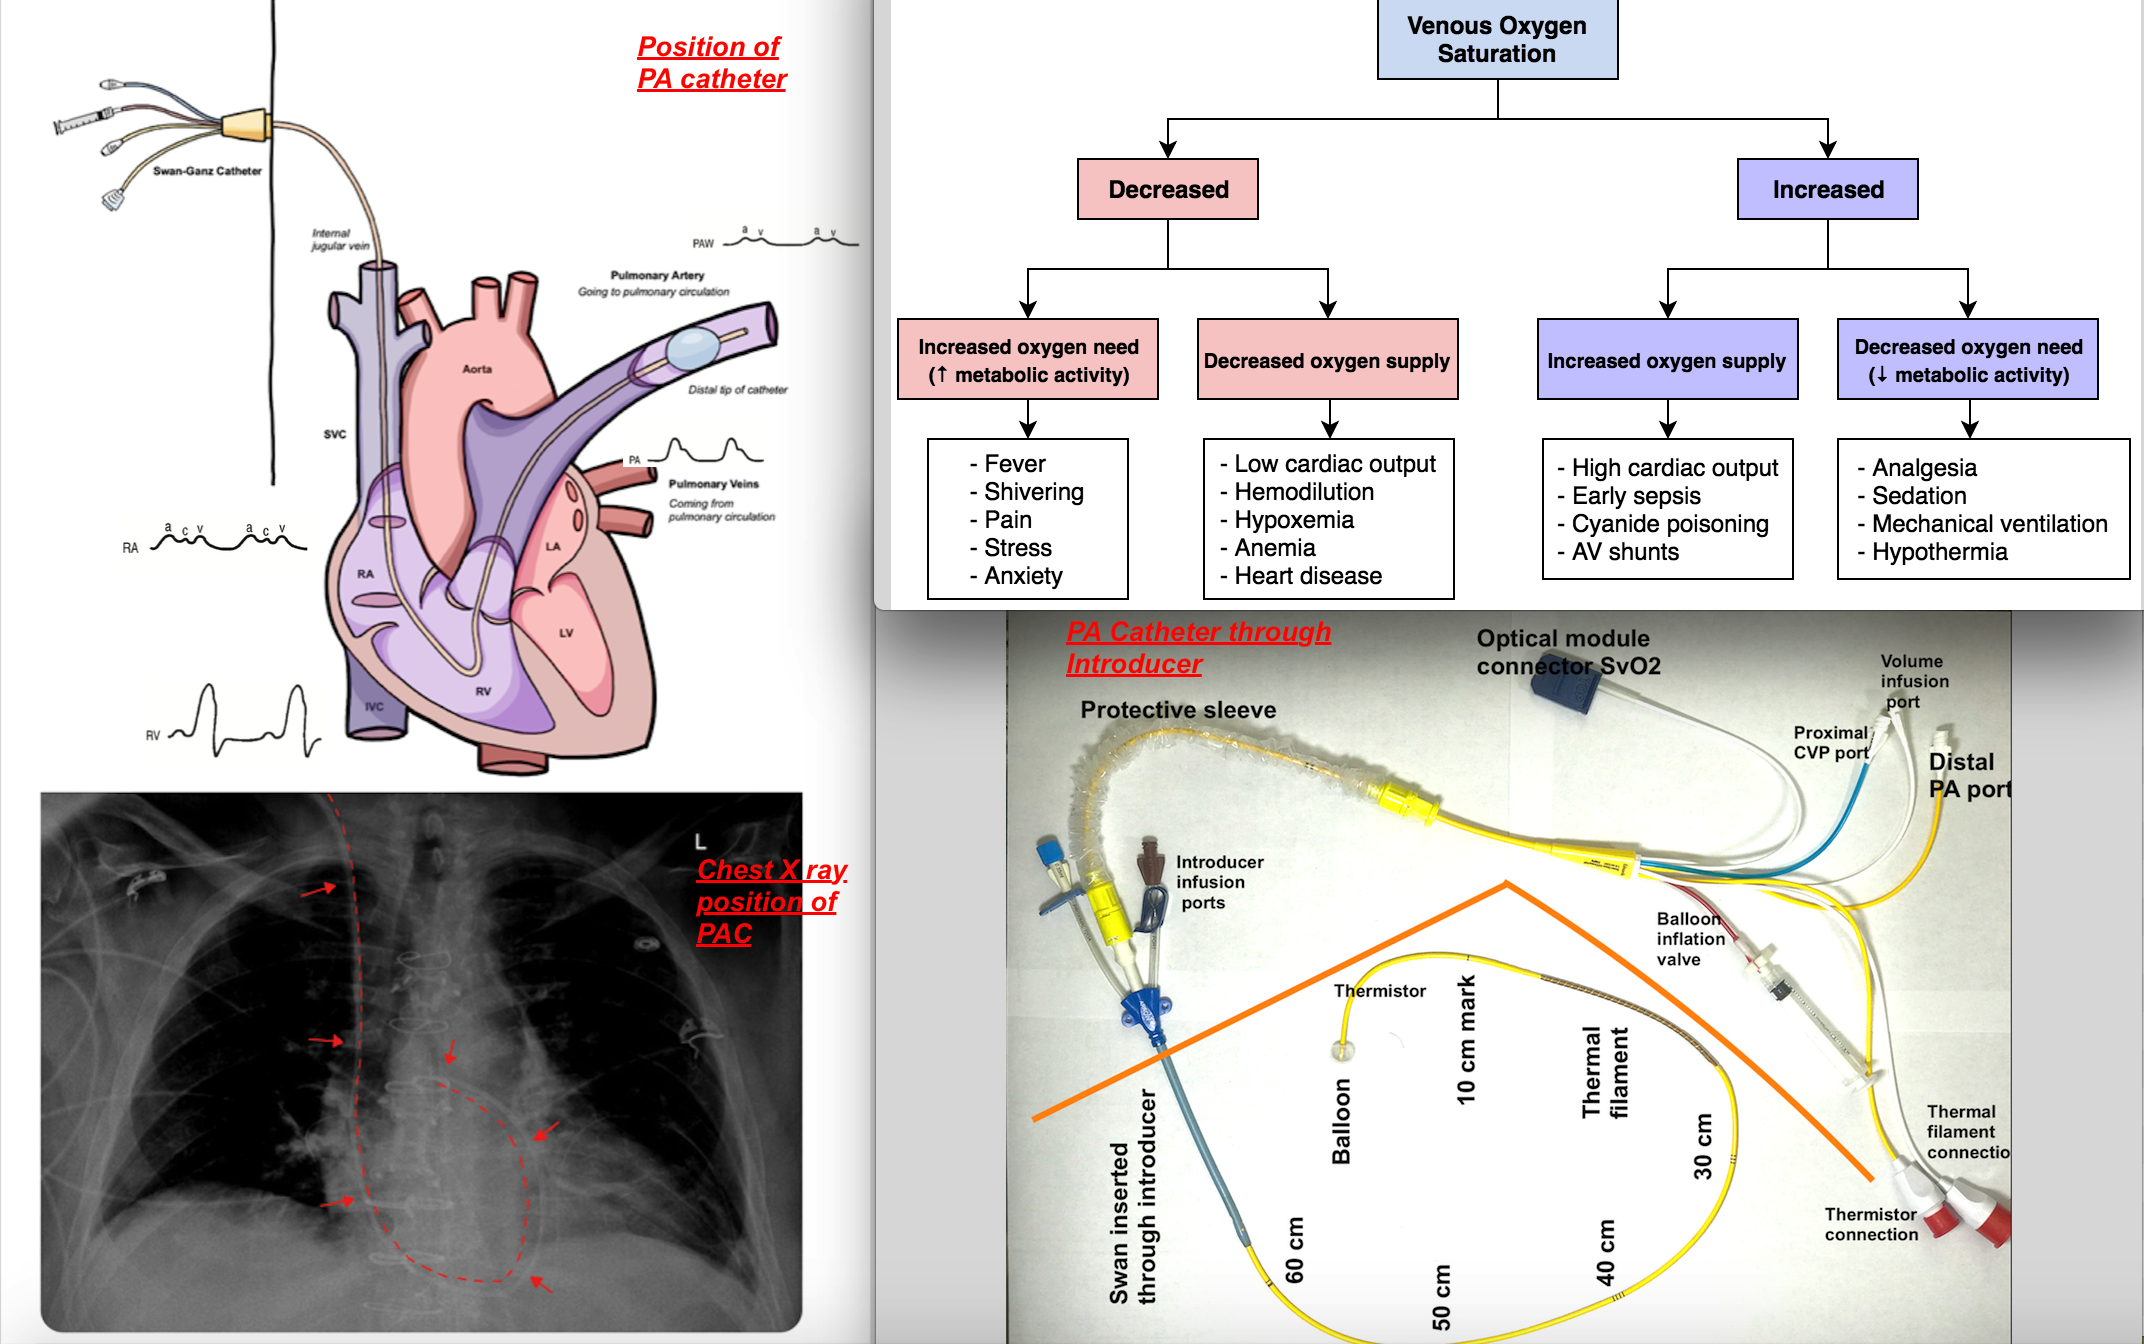 Image depicting position of Pulmonary artery catheter for hemodynamic monitoring, Chest Xray to verify position